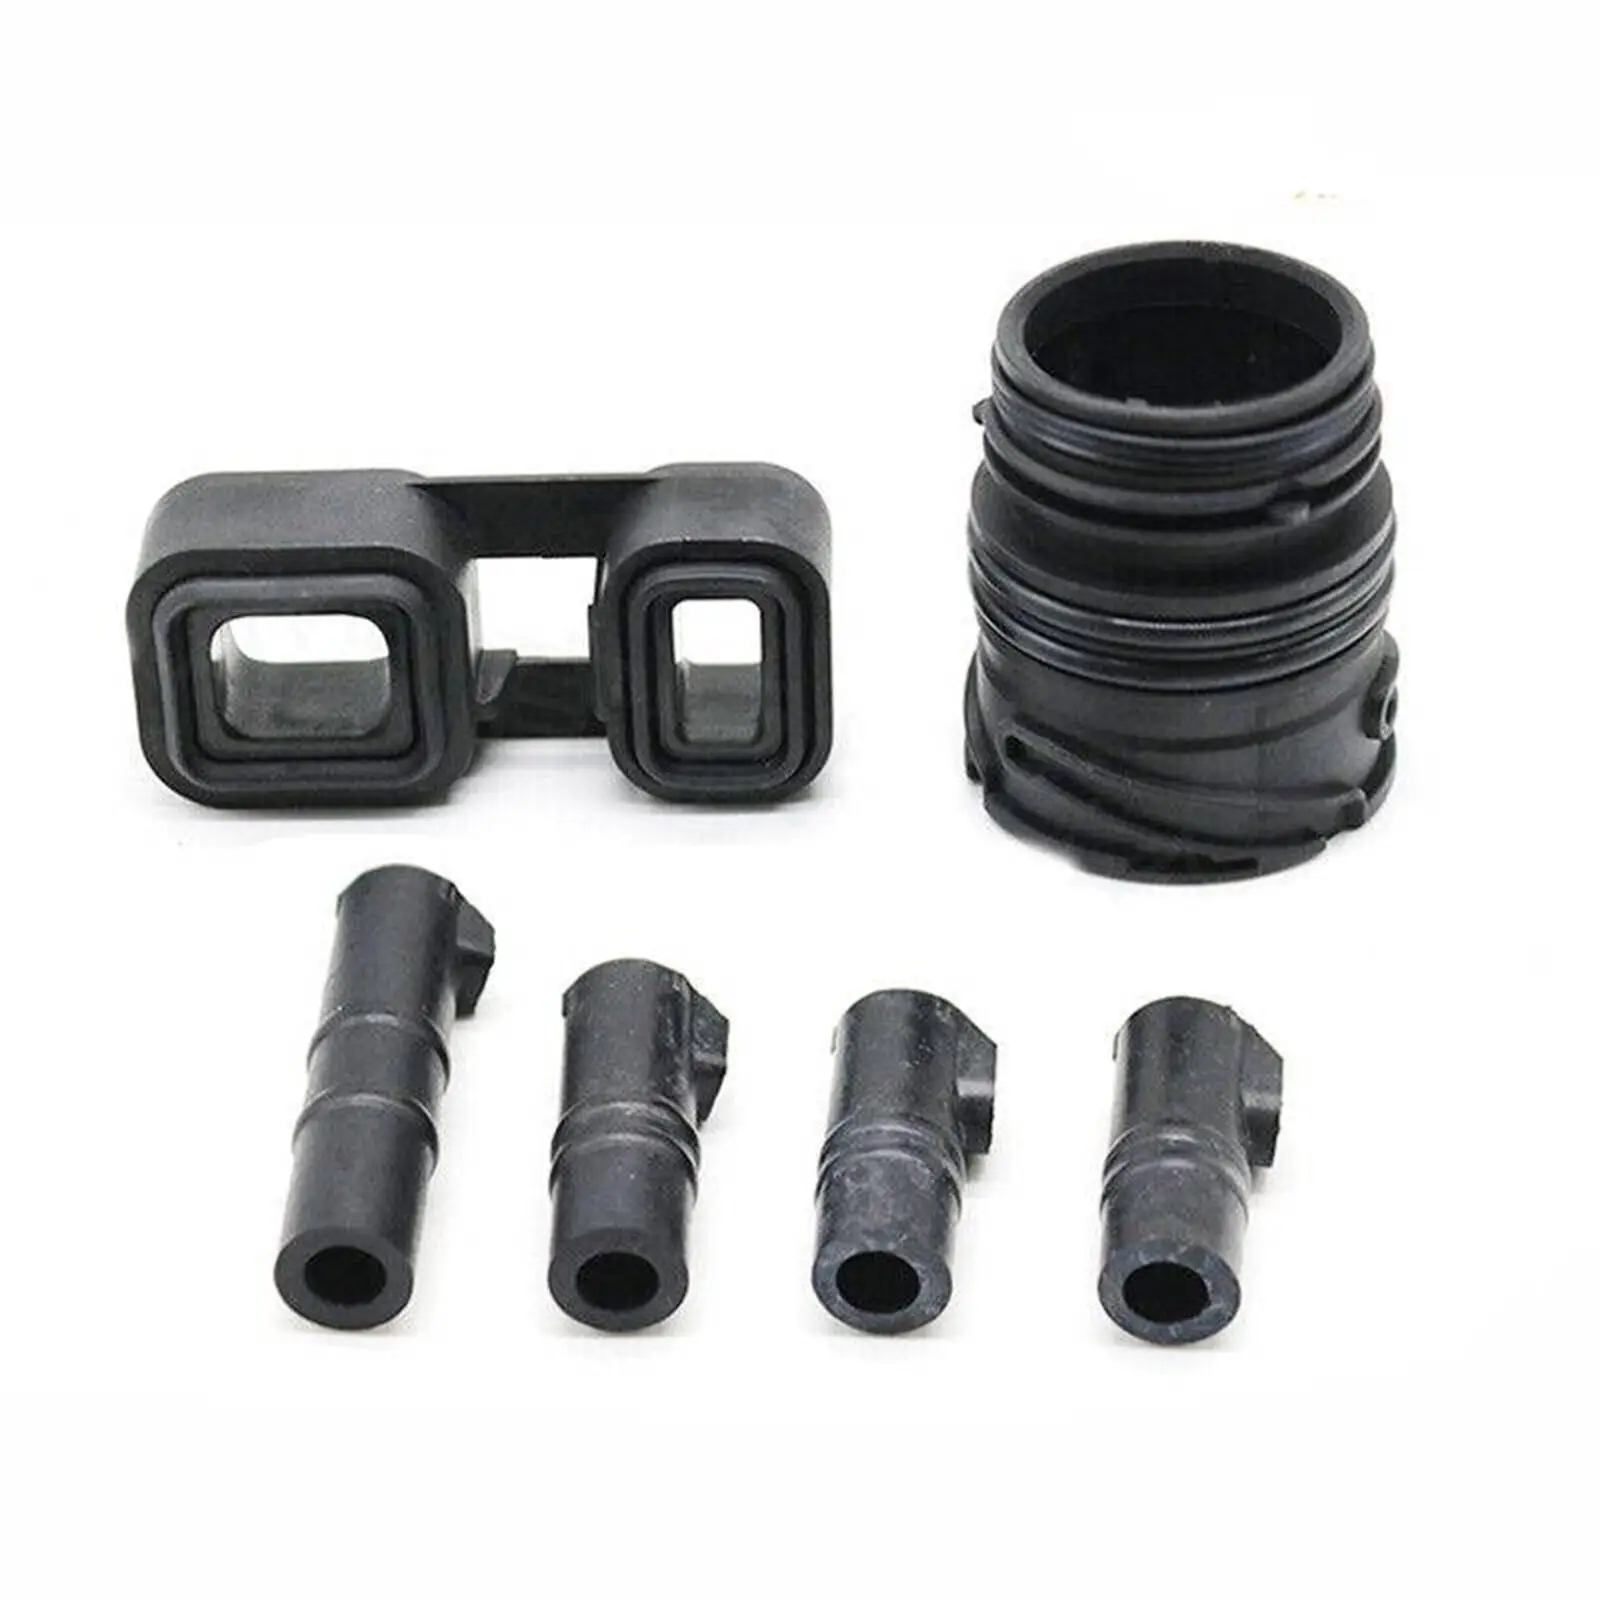 Valve Body Sleeve Connector Seal Kit Replaces Durable Premium for BMW 1 Series